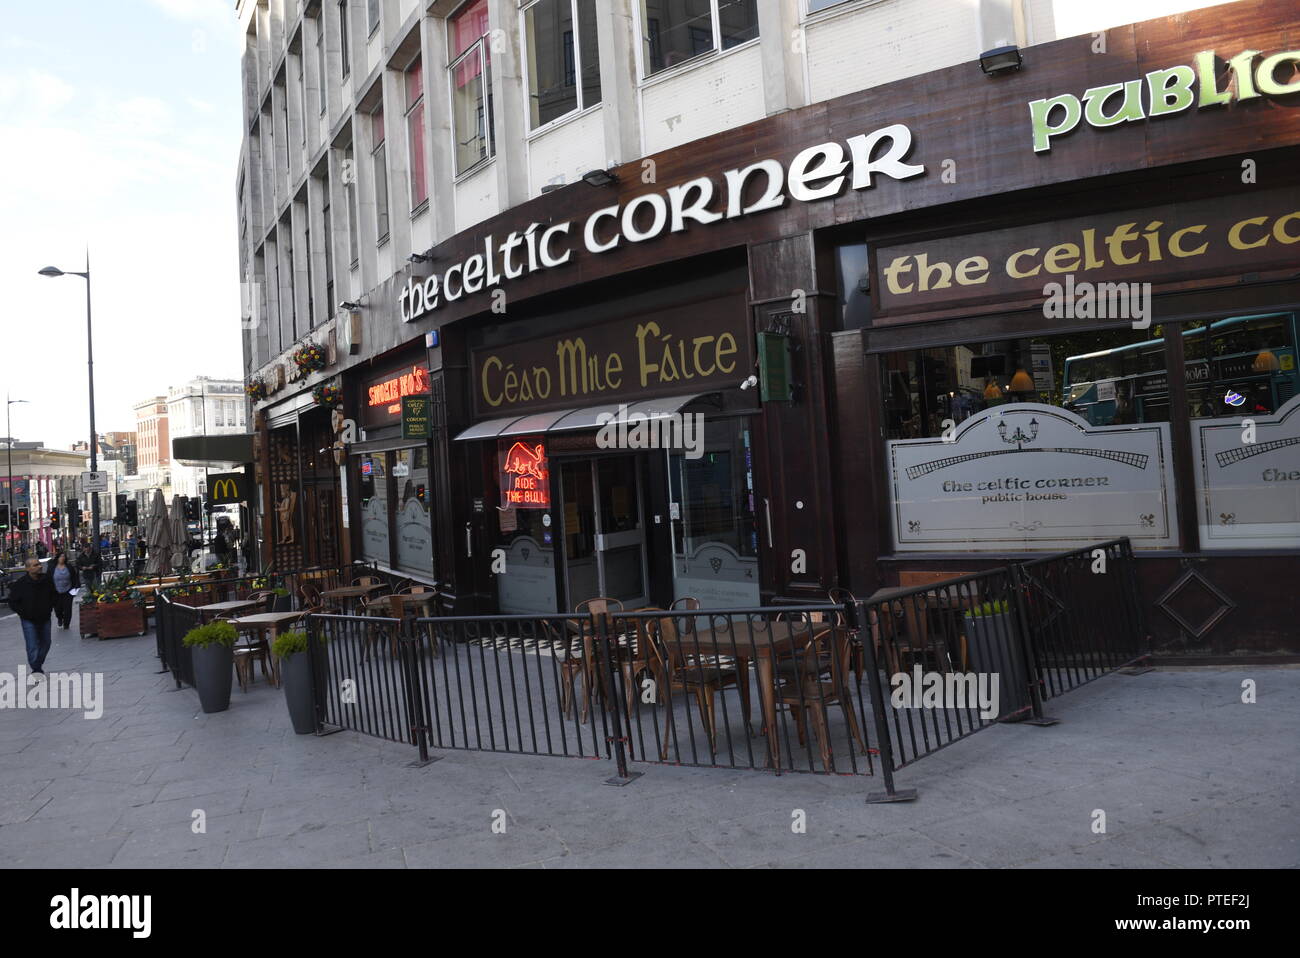 The Celtic Corner pub, 43 Ranelagh St, Liverpool L1 1JR. A rebranded Irish theme pub on the corner of Lime Street and Ranelagh Street in the city cent Stock Photo